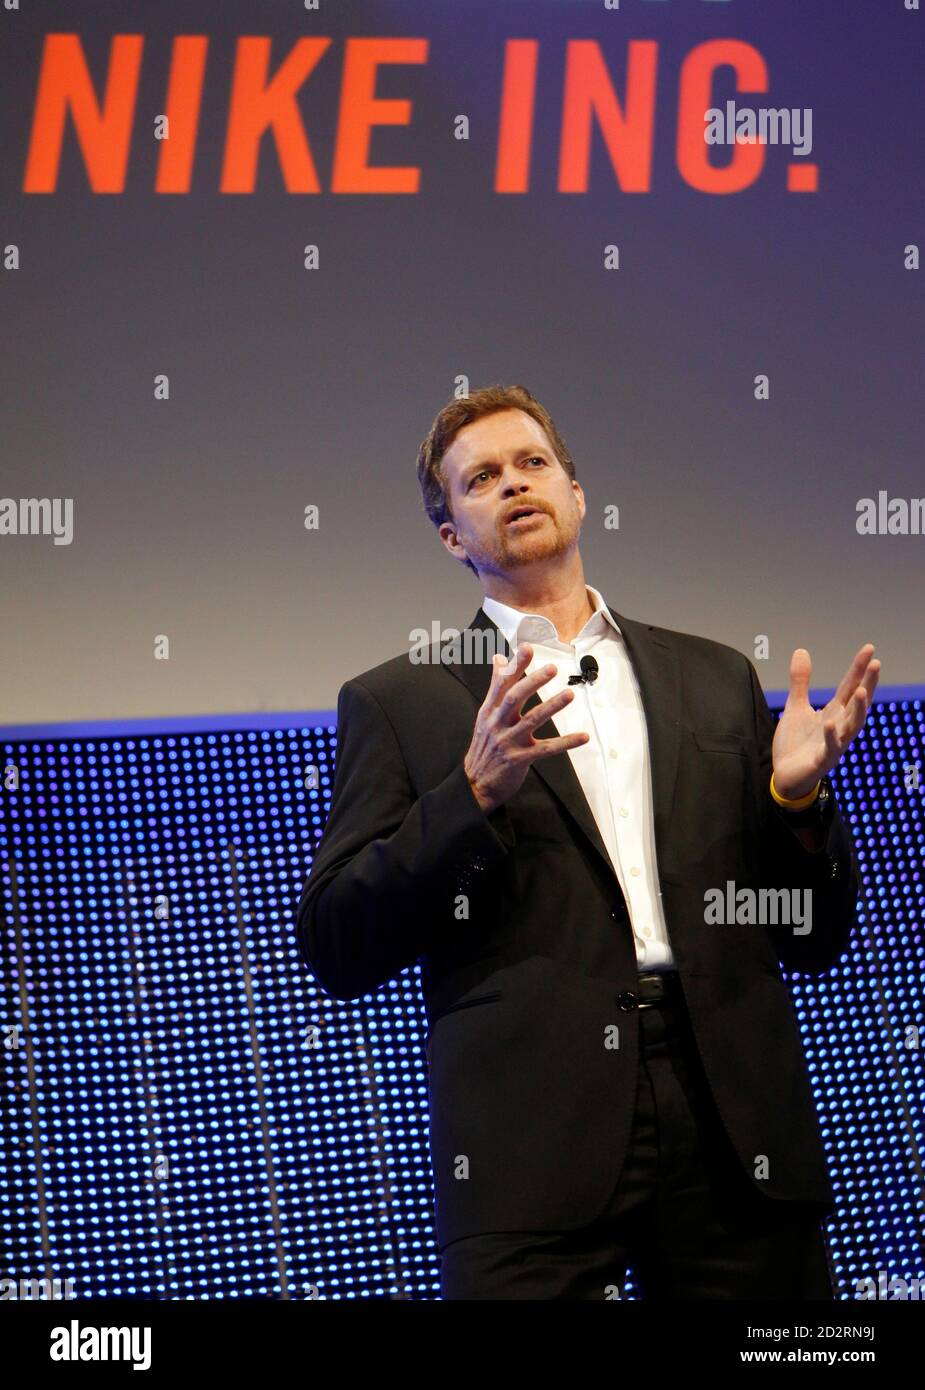 Nike Inc. Chief Executive Officer Mark Parker speaks at the Nike Investor  meeting event in New York, May 5, 2010. REUTERS/Mike Segar (UNITED STATES -  Tags: SPORT BUSINESS Stock Photo - Alamy